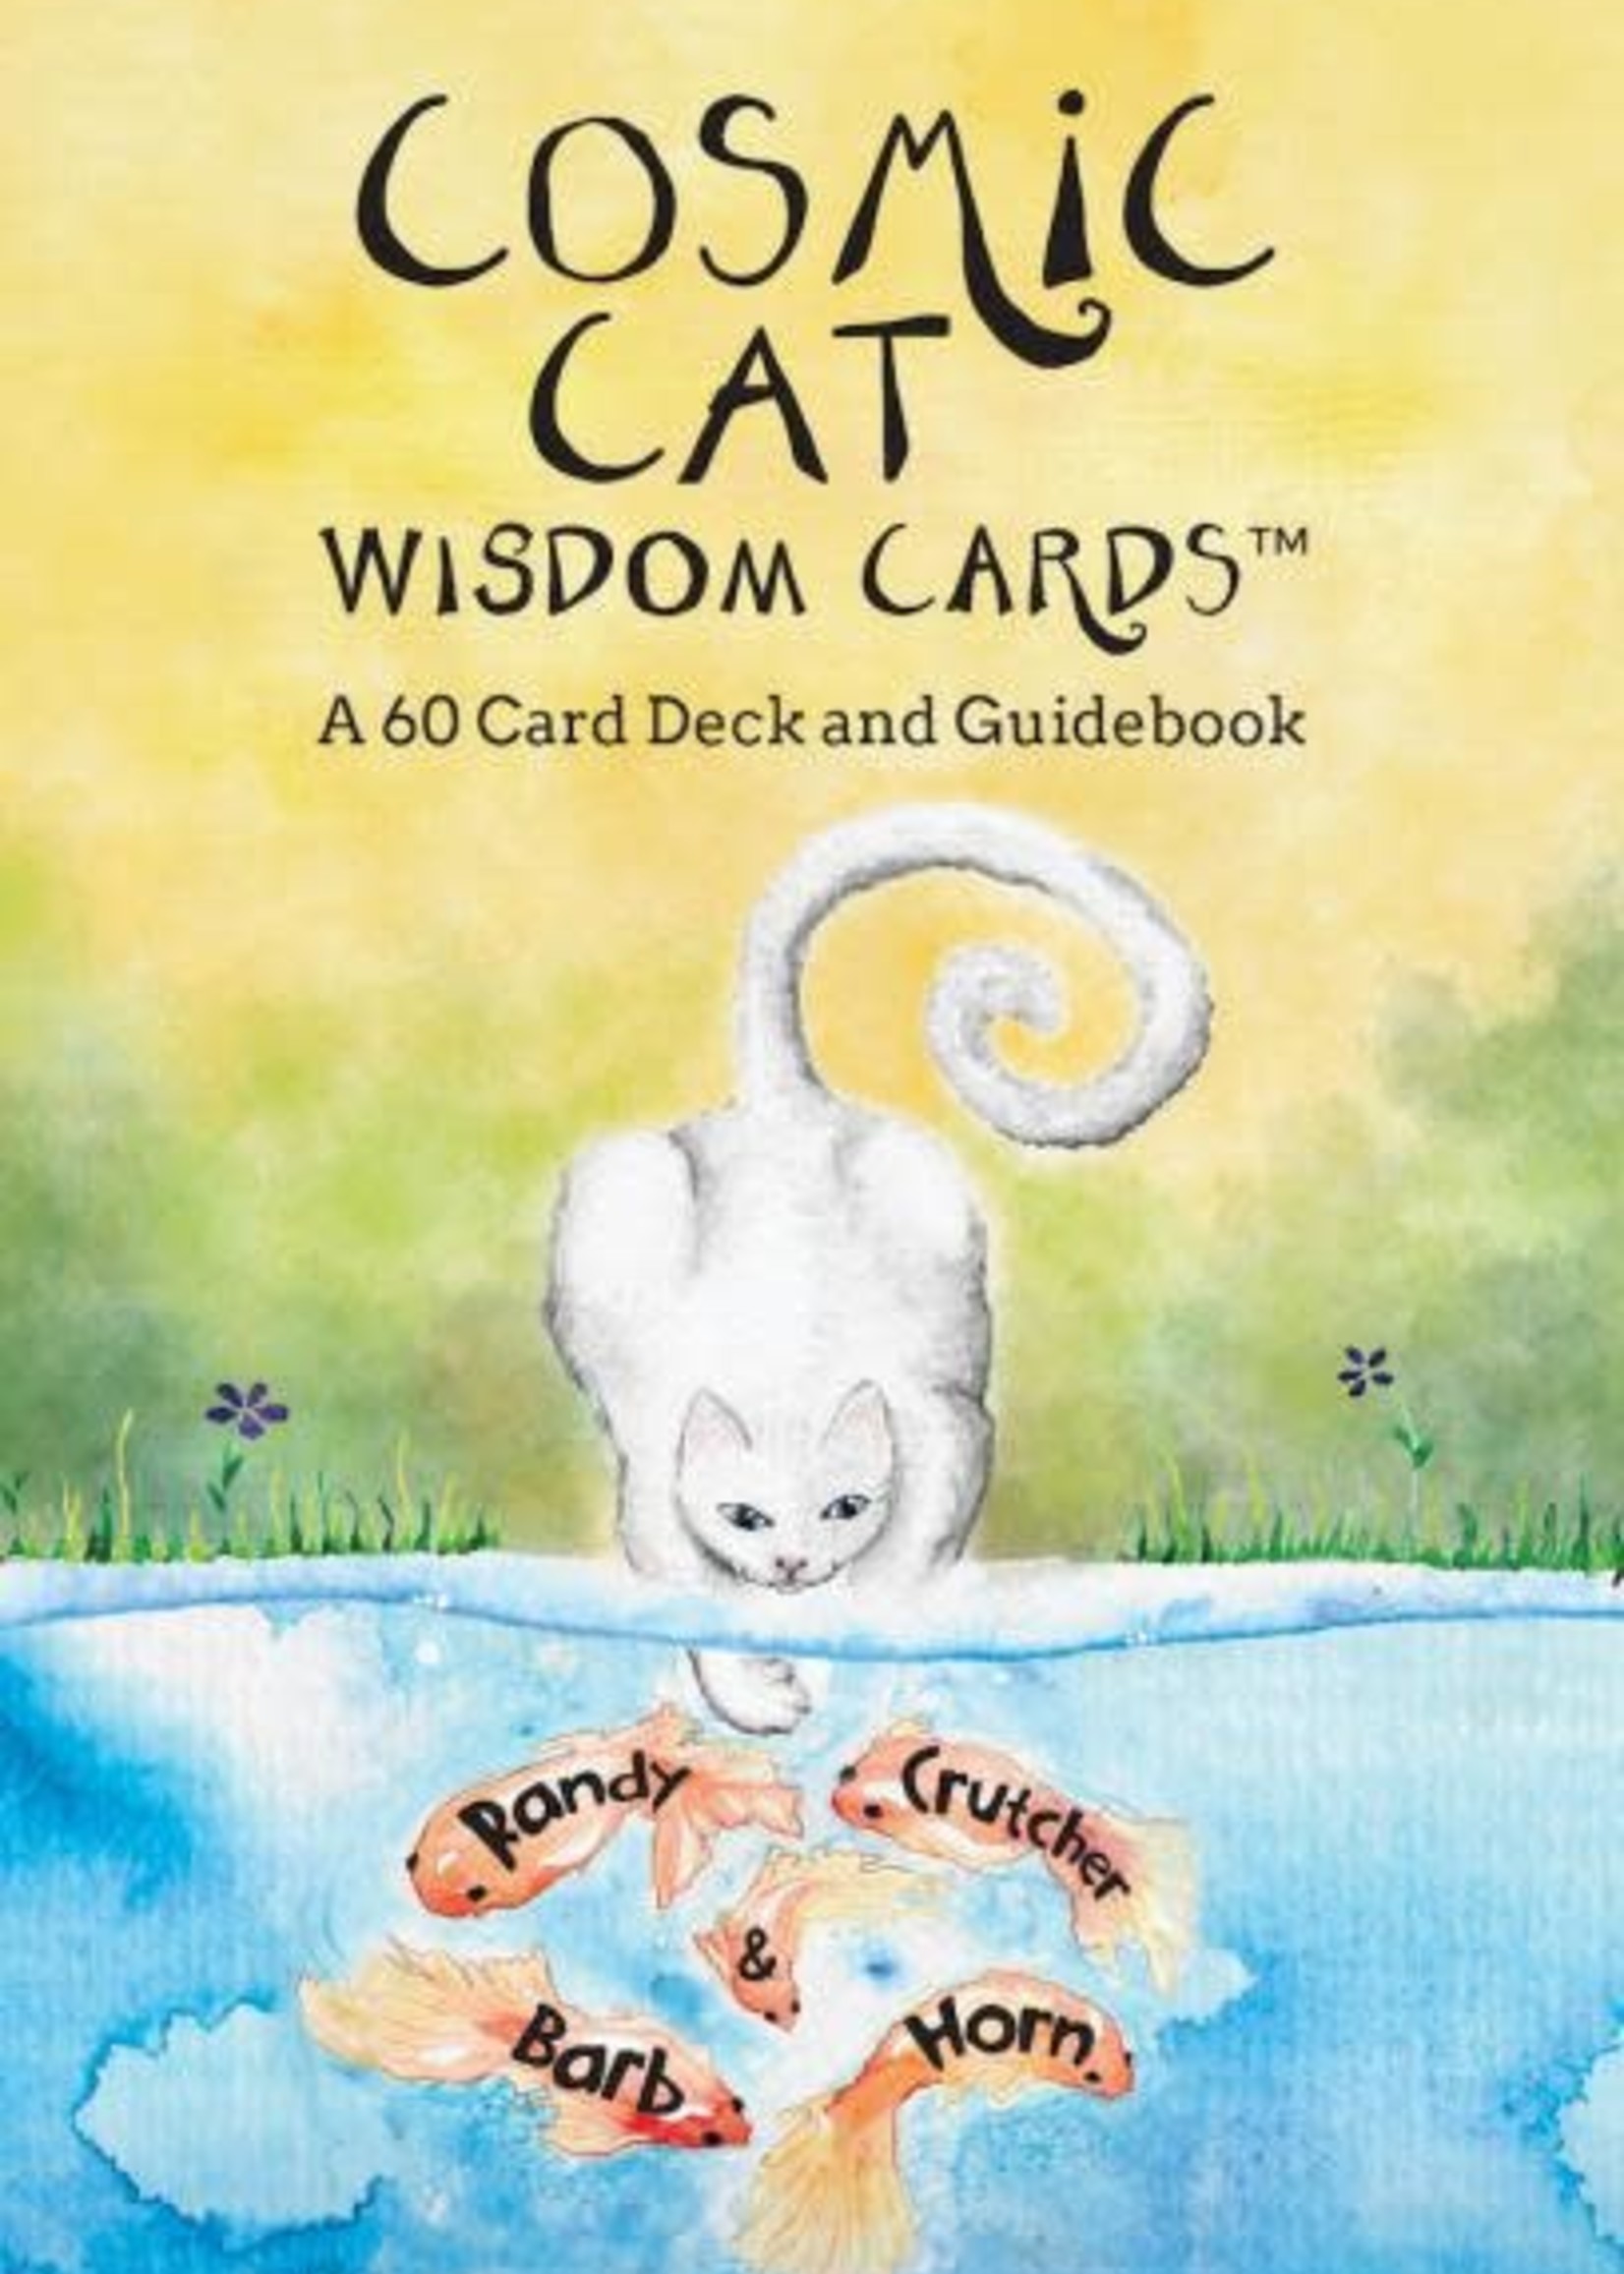 Cosmic Cat Wisdom Cards: A 60 Card Deck and Guidebook